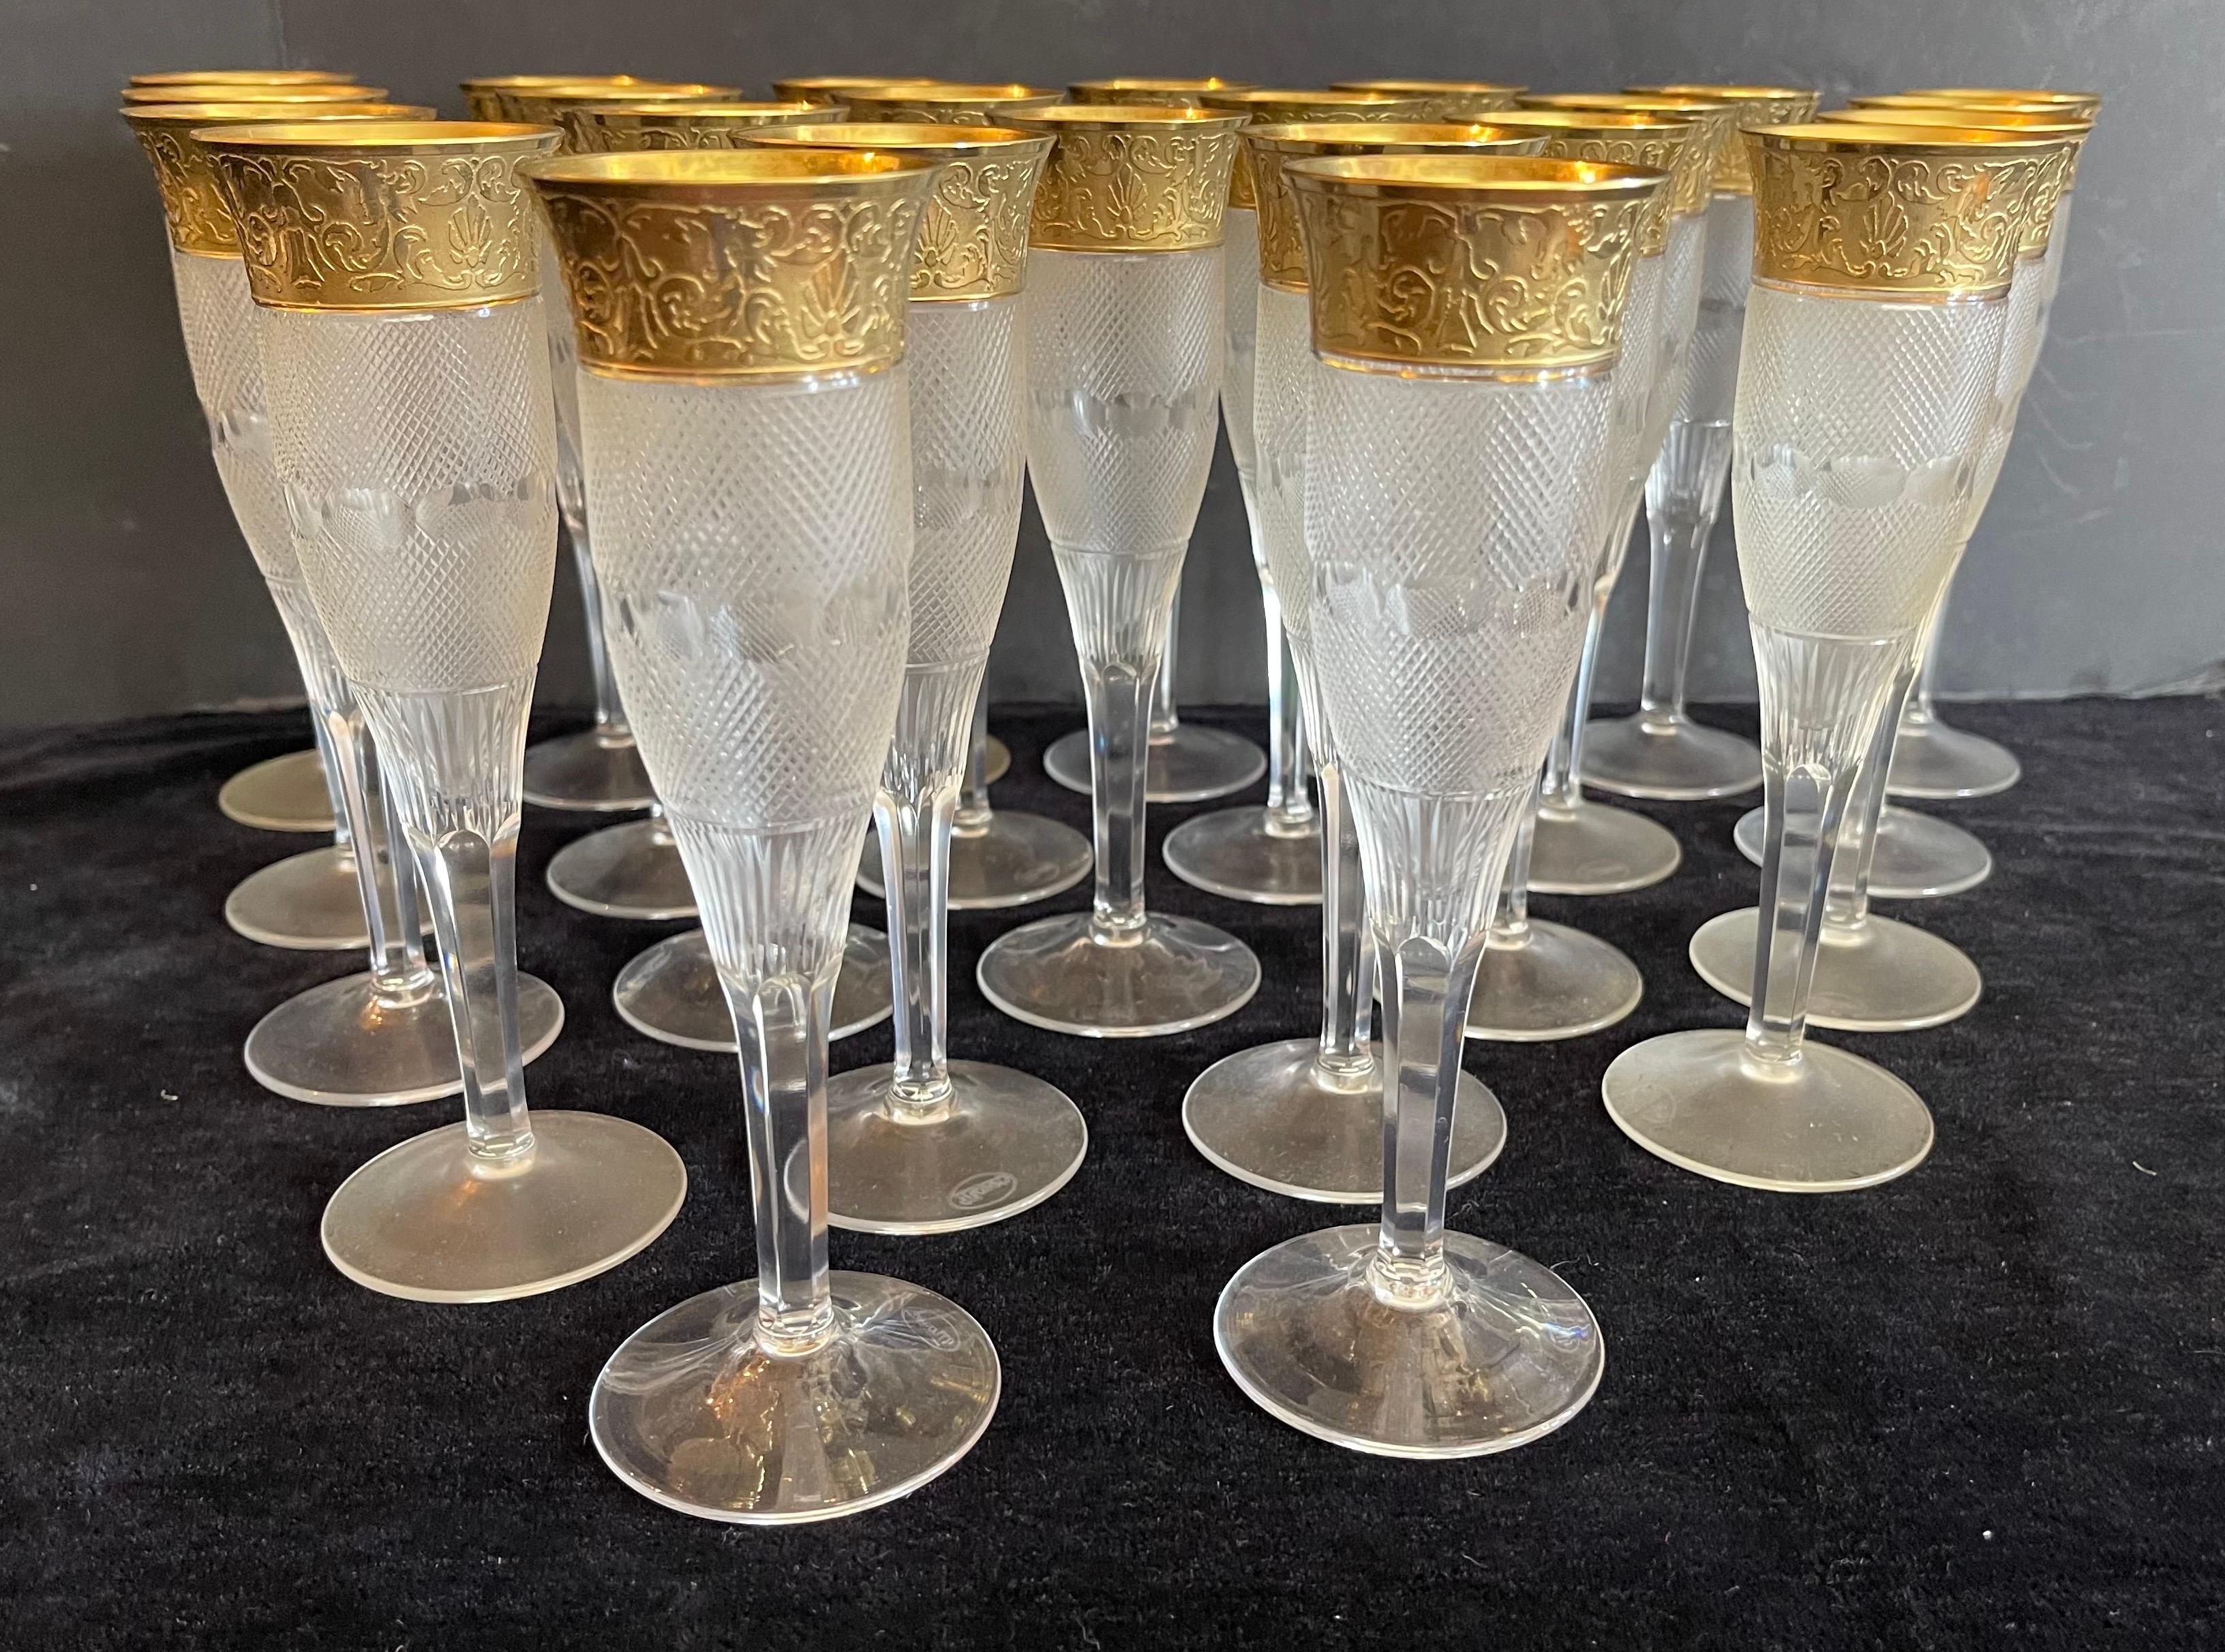 Wonderful Set 24 Moser Splendid Crystal 24K Gold Rim Fluted Champagne Goblets. The Splendid Pattern Originally Designed In 1911 And Quickly Became The Magnum Opus Of Moser's Patterns. The Crystal Body Is Diamond Crosscut By Hand With An Engraved 24K